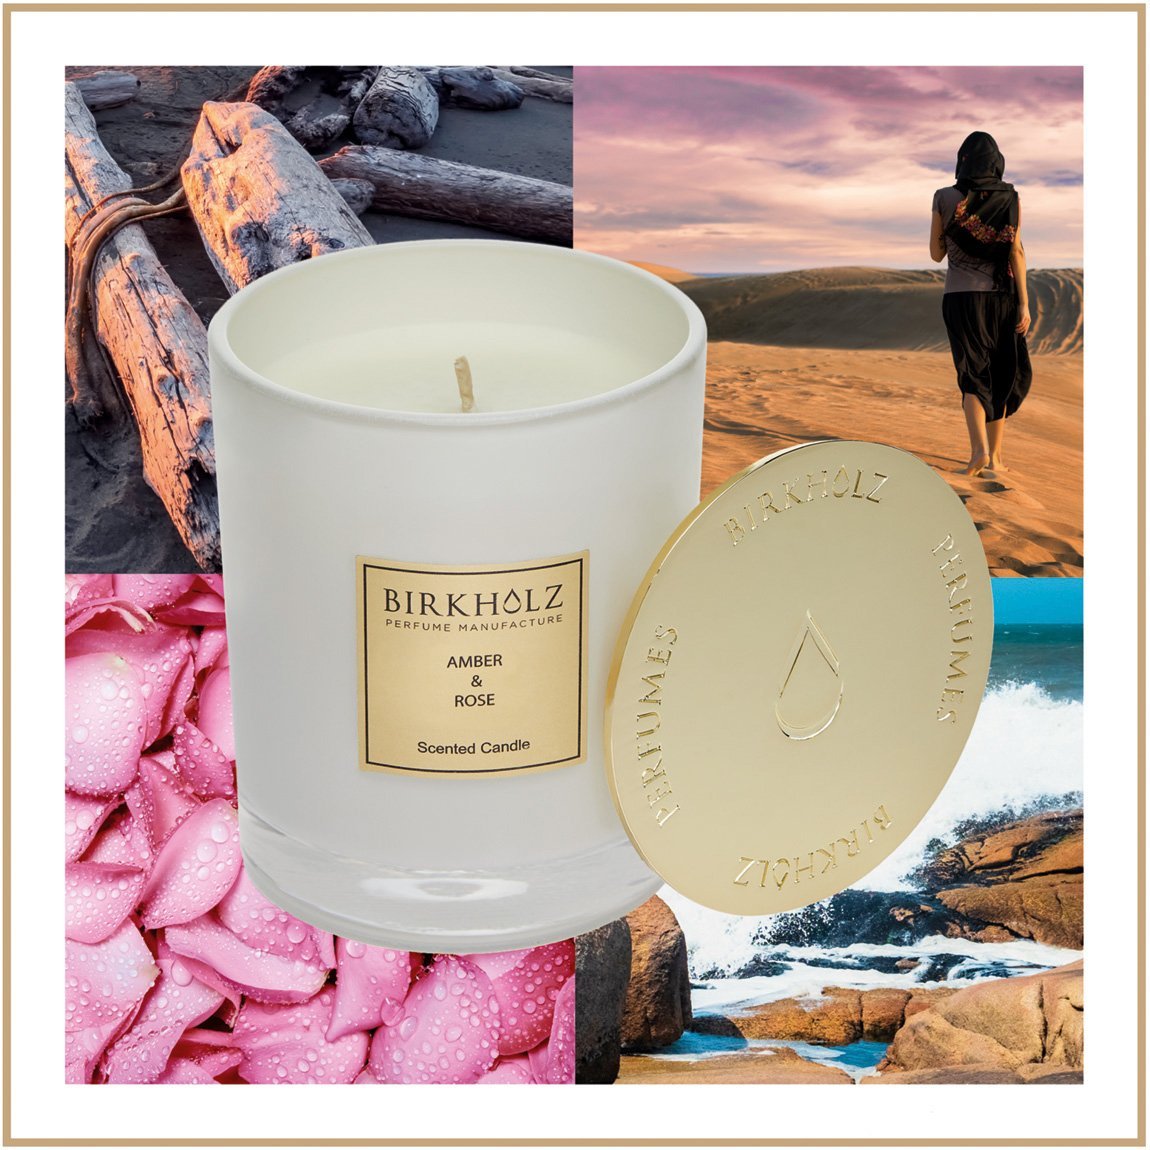 Scented Candle Amber & Rose - Birkholz Perfume Manufacture